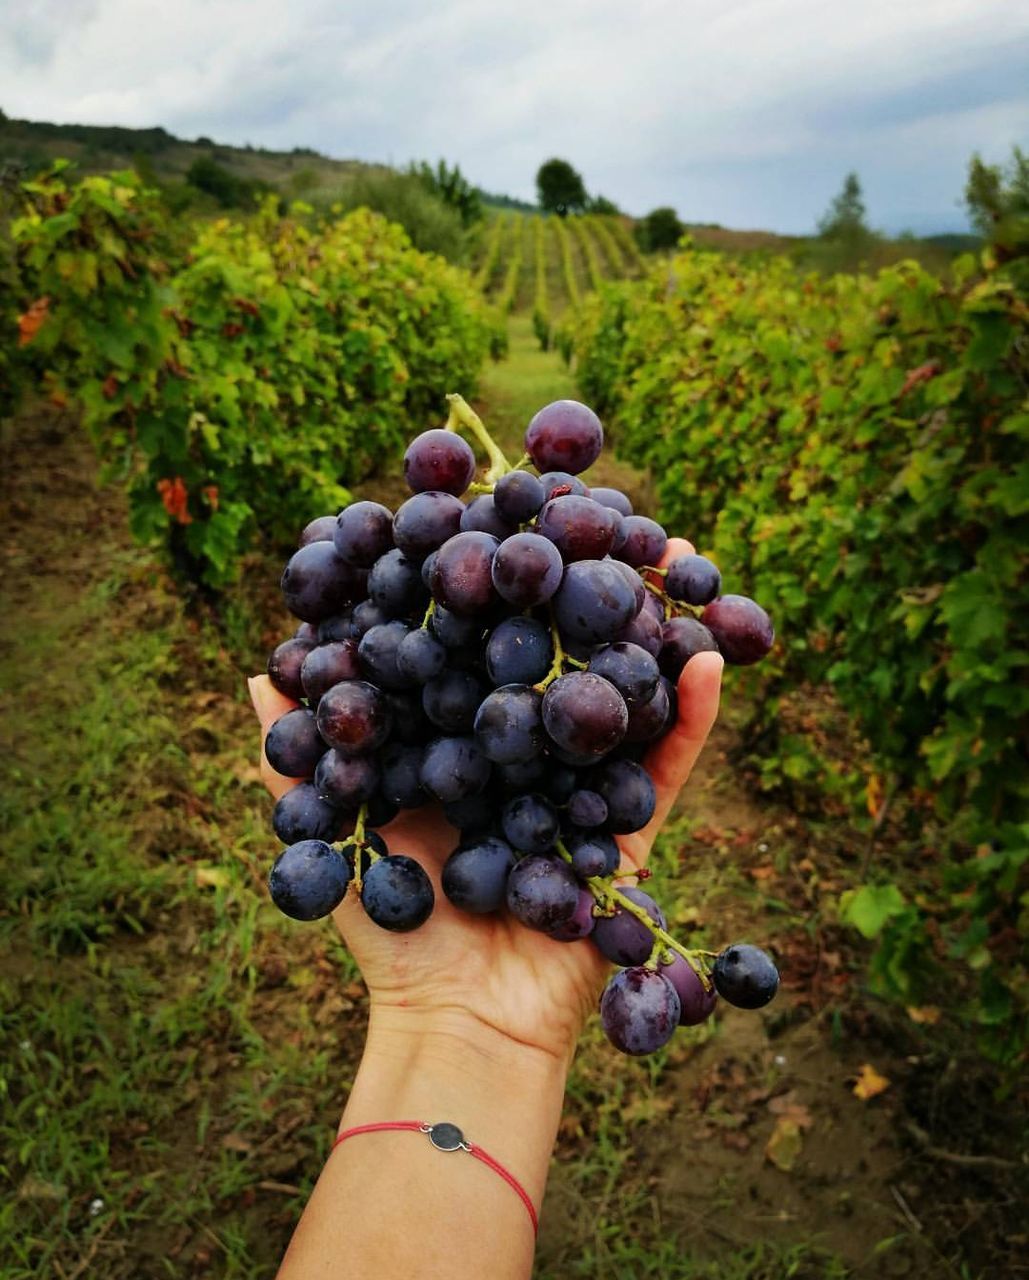 CROPPED HAND HOLDING GRAPES OVER VINEYARD